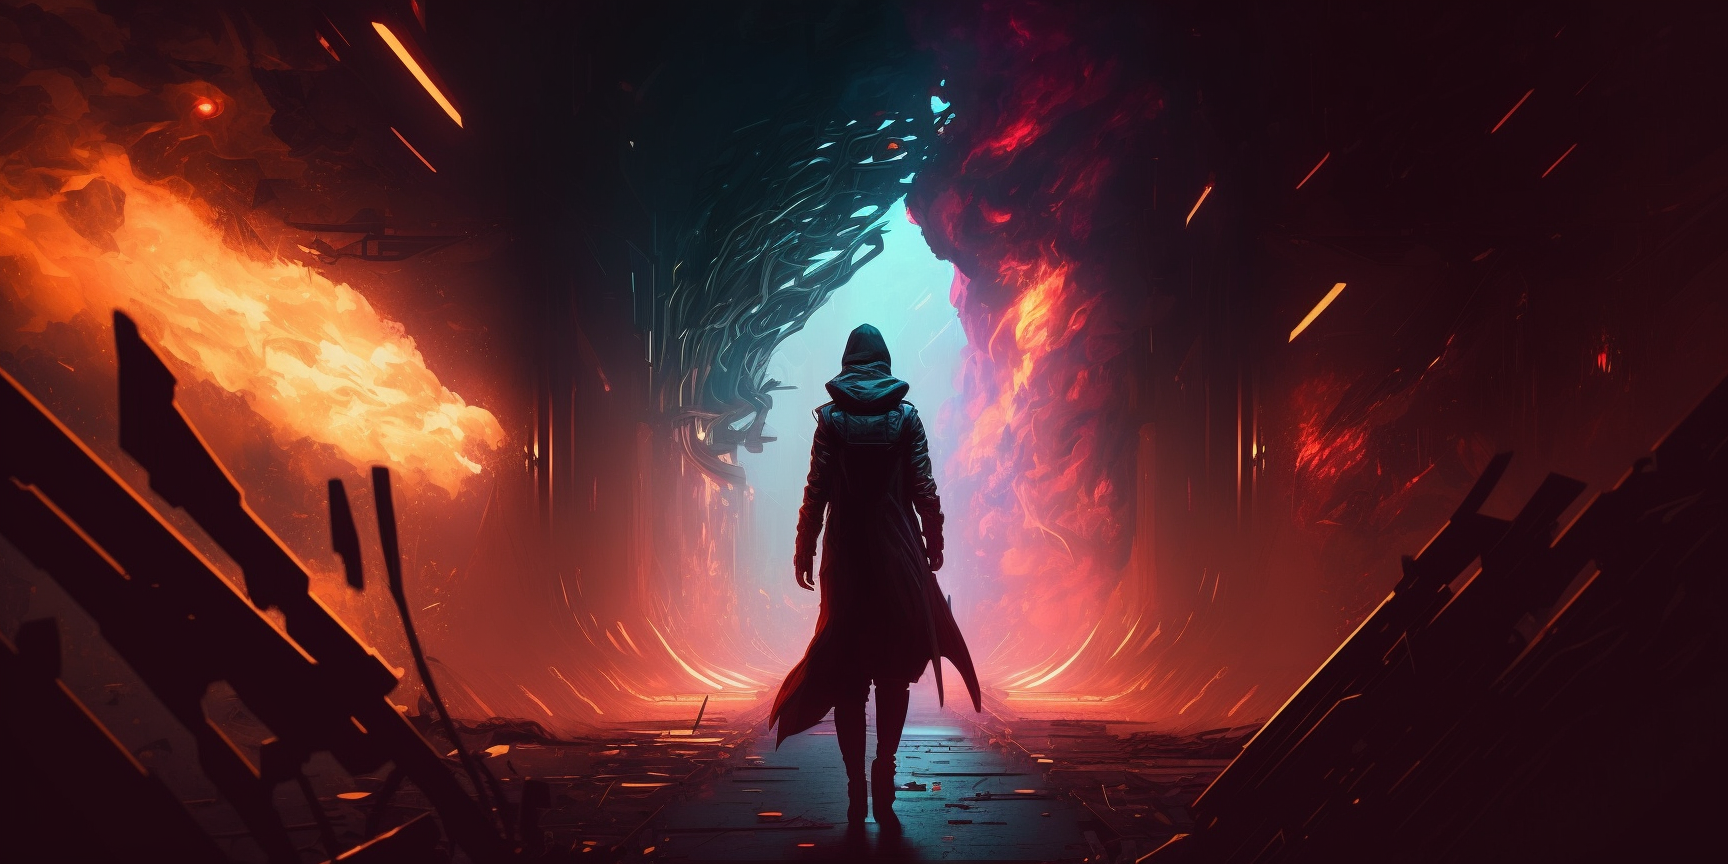 Person in dark clothing walking down a path through colorful flames